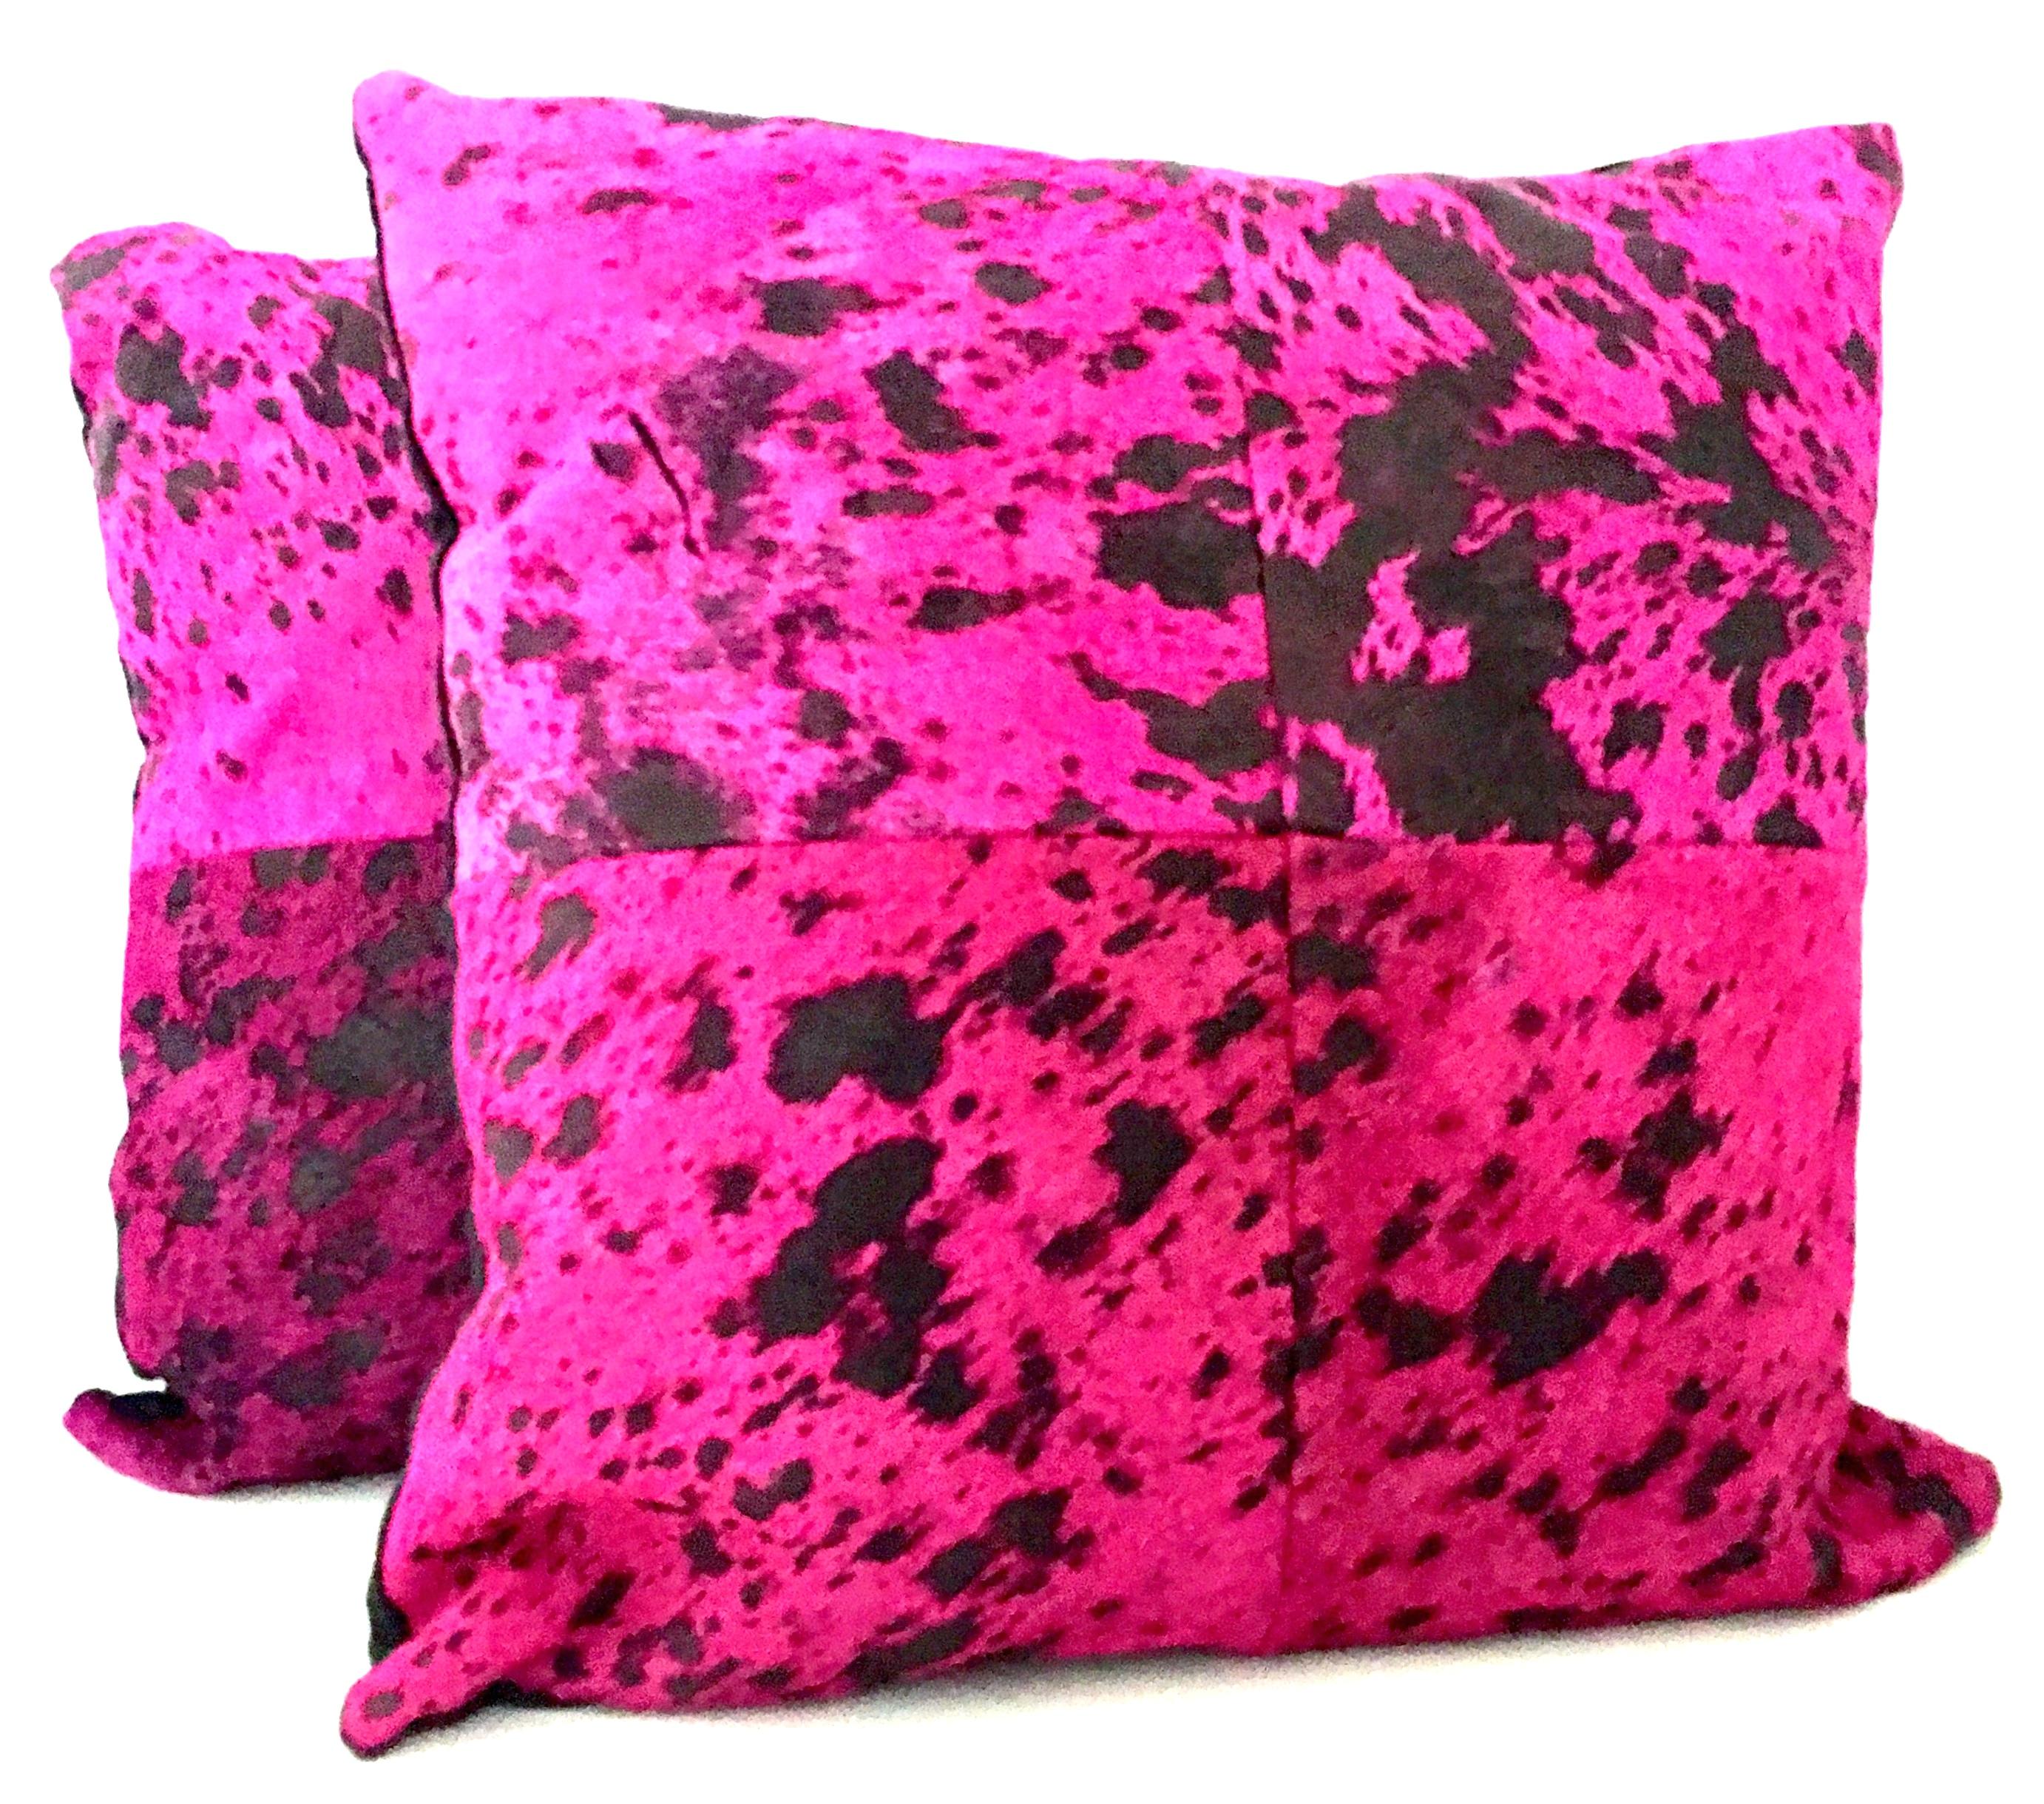 21st century and new pair of fuchsia & chocolate brown hide hair pillows. These dramatic but Classic hide hair pillows are died fuchsia and chocolate brown as slip covers. The bacj side is finished in black fabric. Each pillow included a cotton